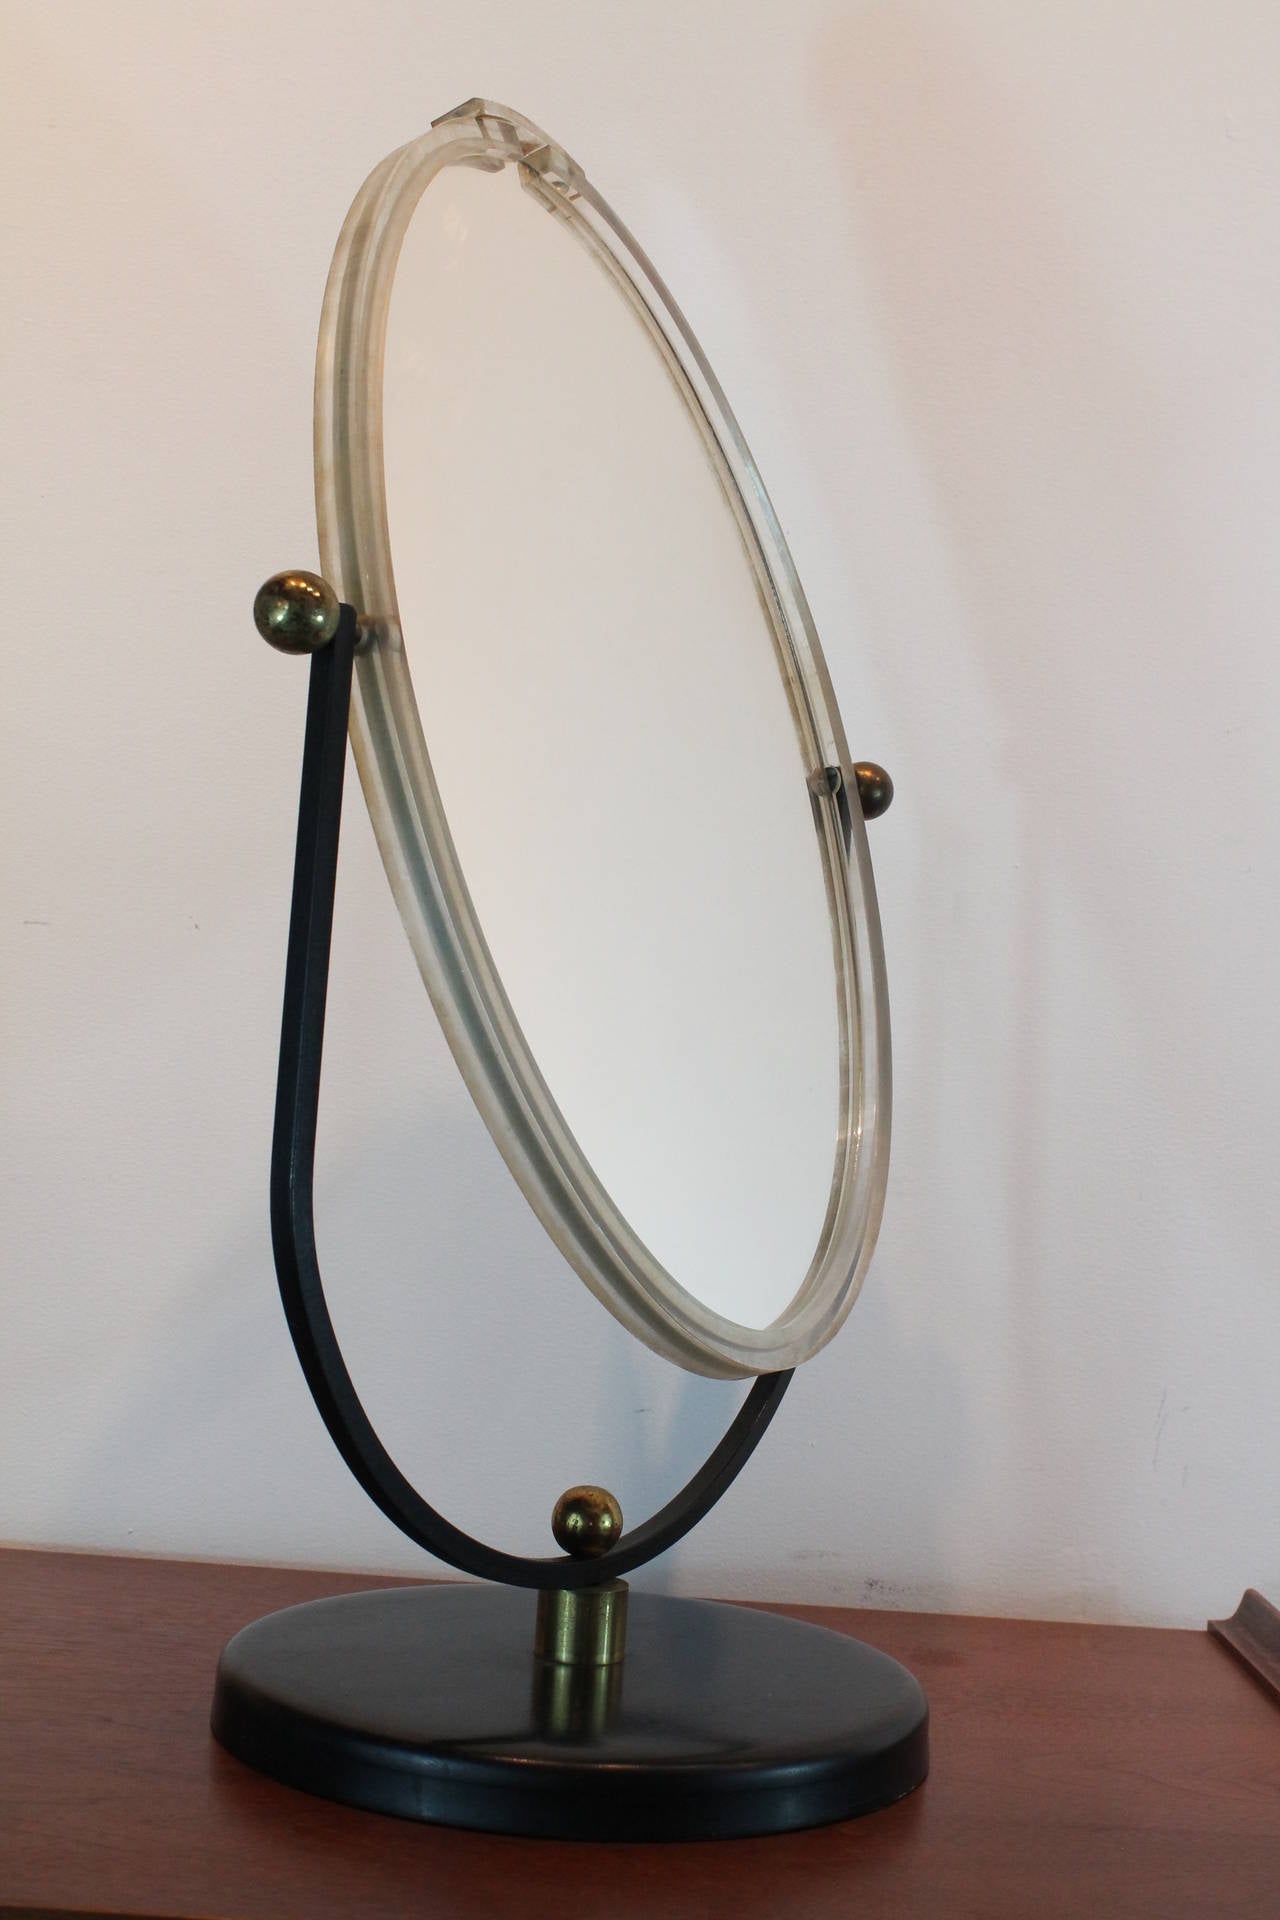 Large scale sculptural Mid-Century Modern lucite framed vanity mirror with ebonized metal base and arms with brass column and ball hinges.
Double sided mirror that can swivel and be tightened in any position.